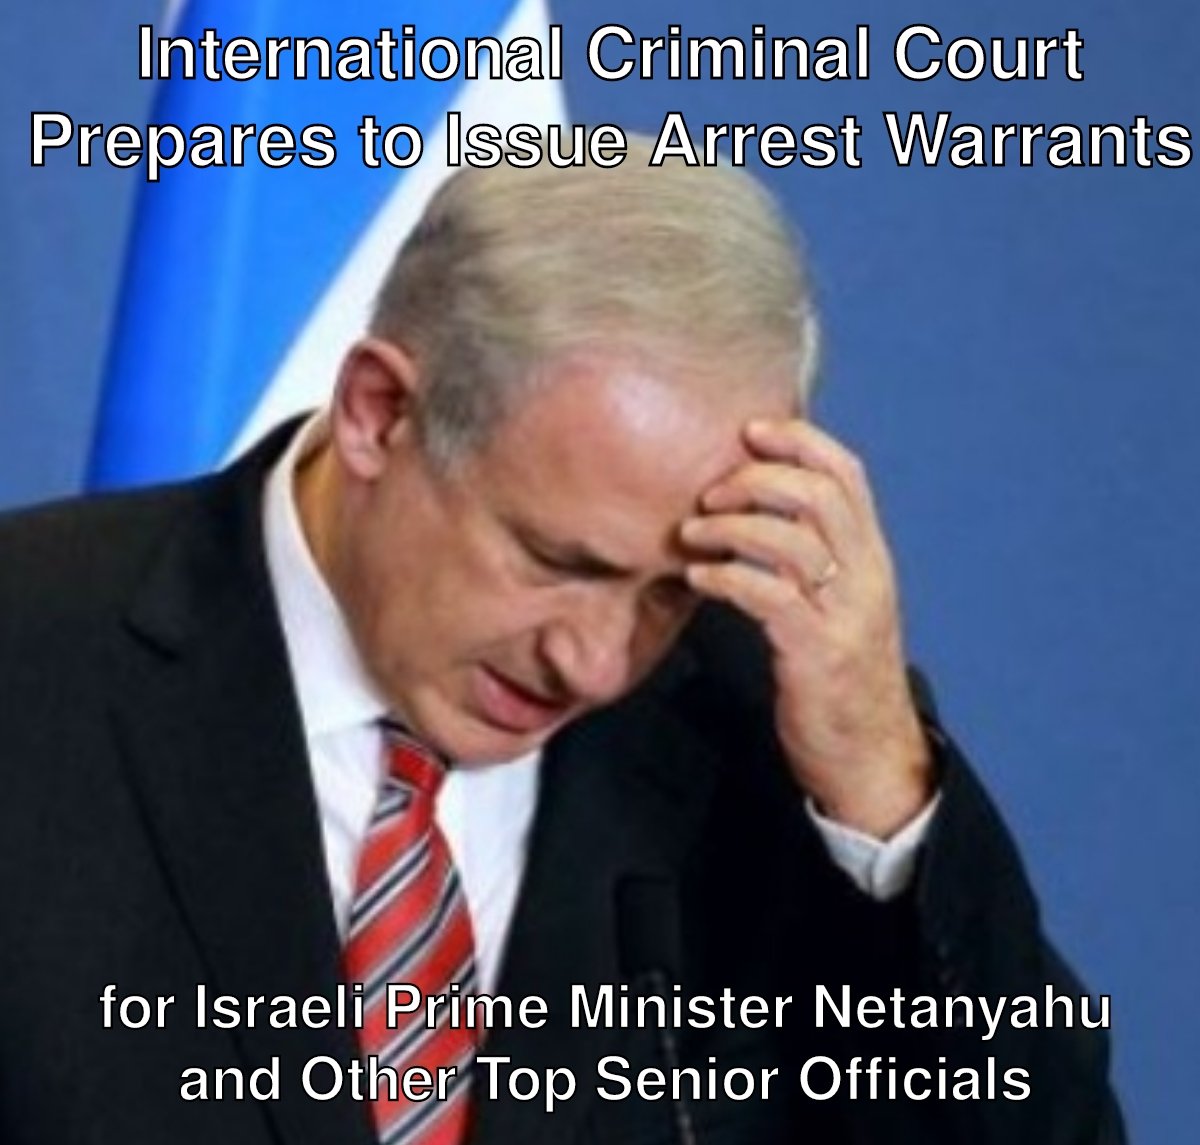 International Criminal Court Prepares to Issue Arrest Warrants for Israeli Prime Minister Netanyahu and Other Top Senior Officials, Sources Say stateofthenation.co/?p=226003